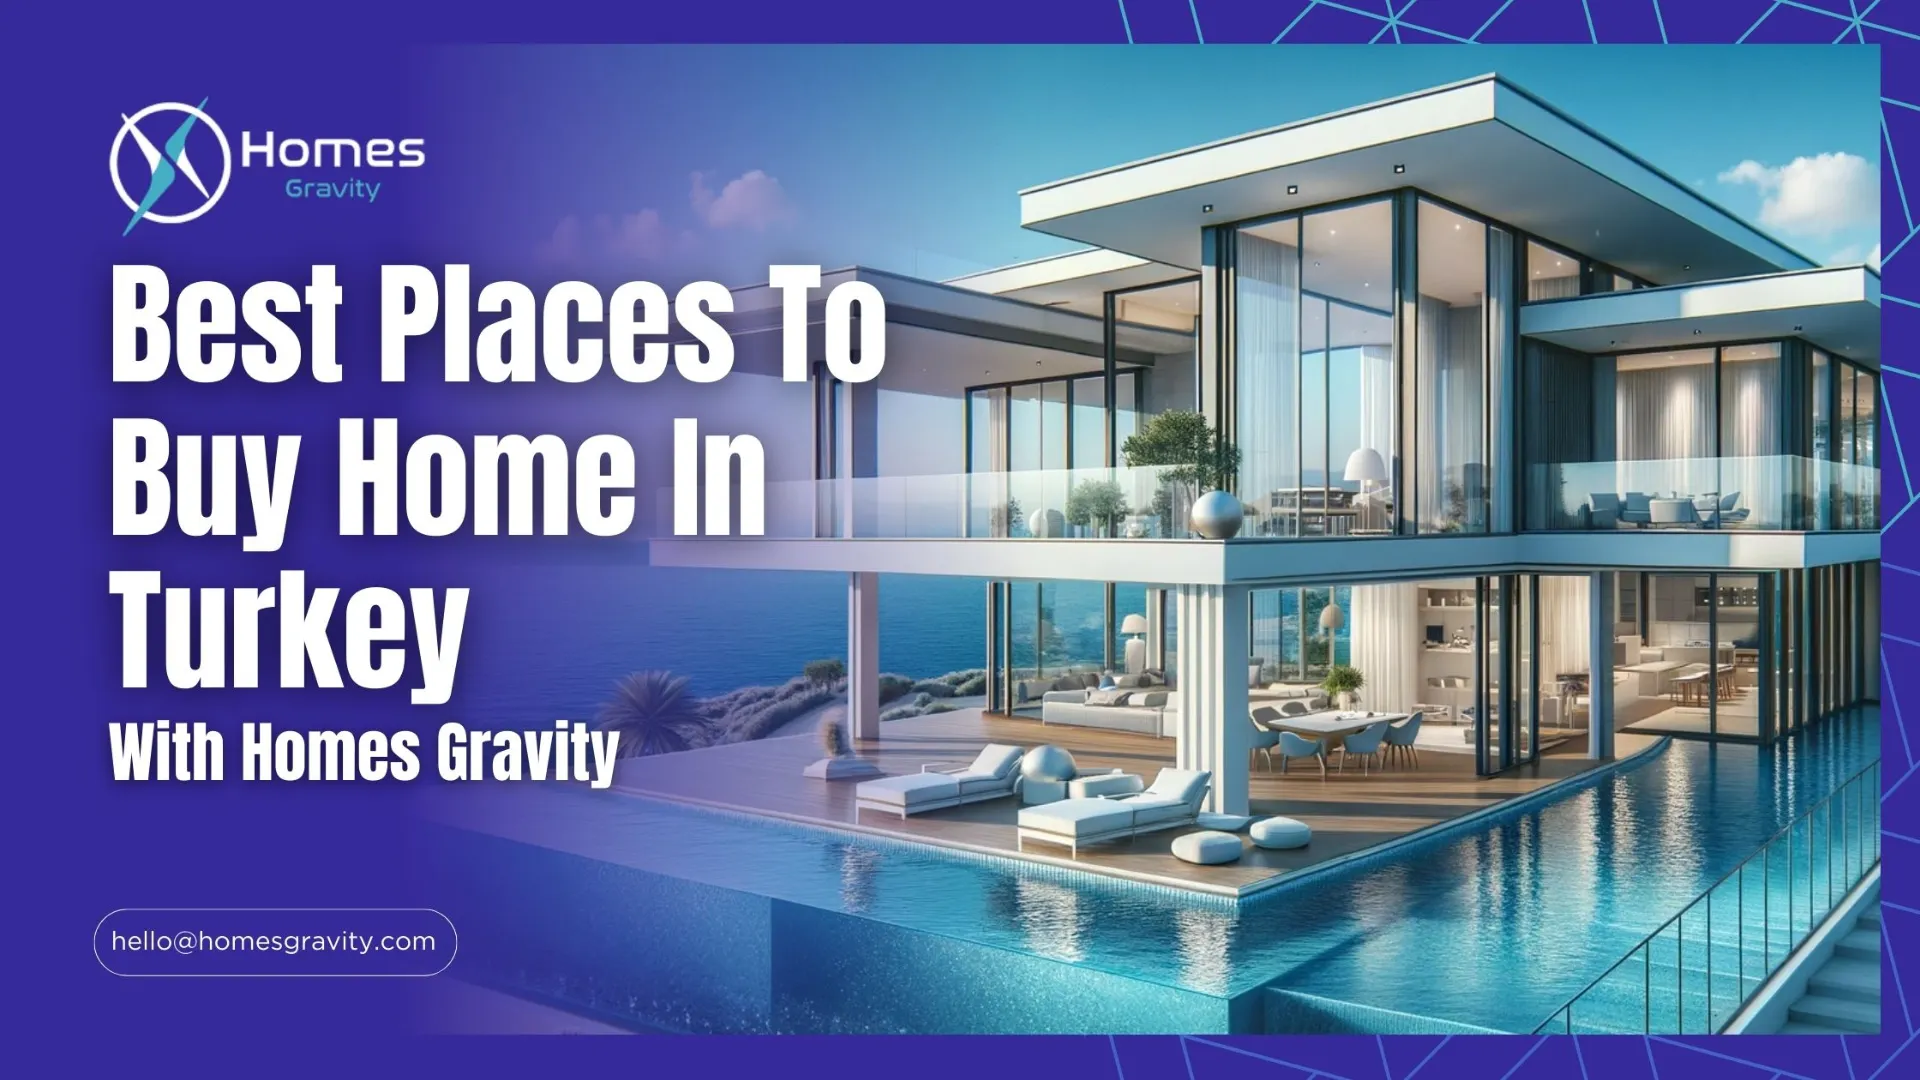 Best Places To Buy Home In Turkey insights of Homes Gravity